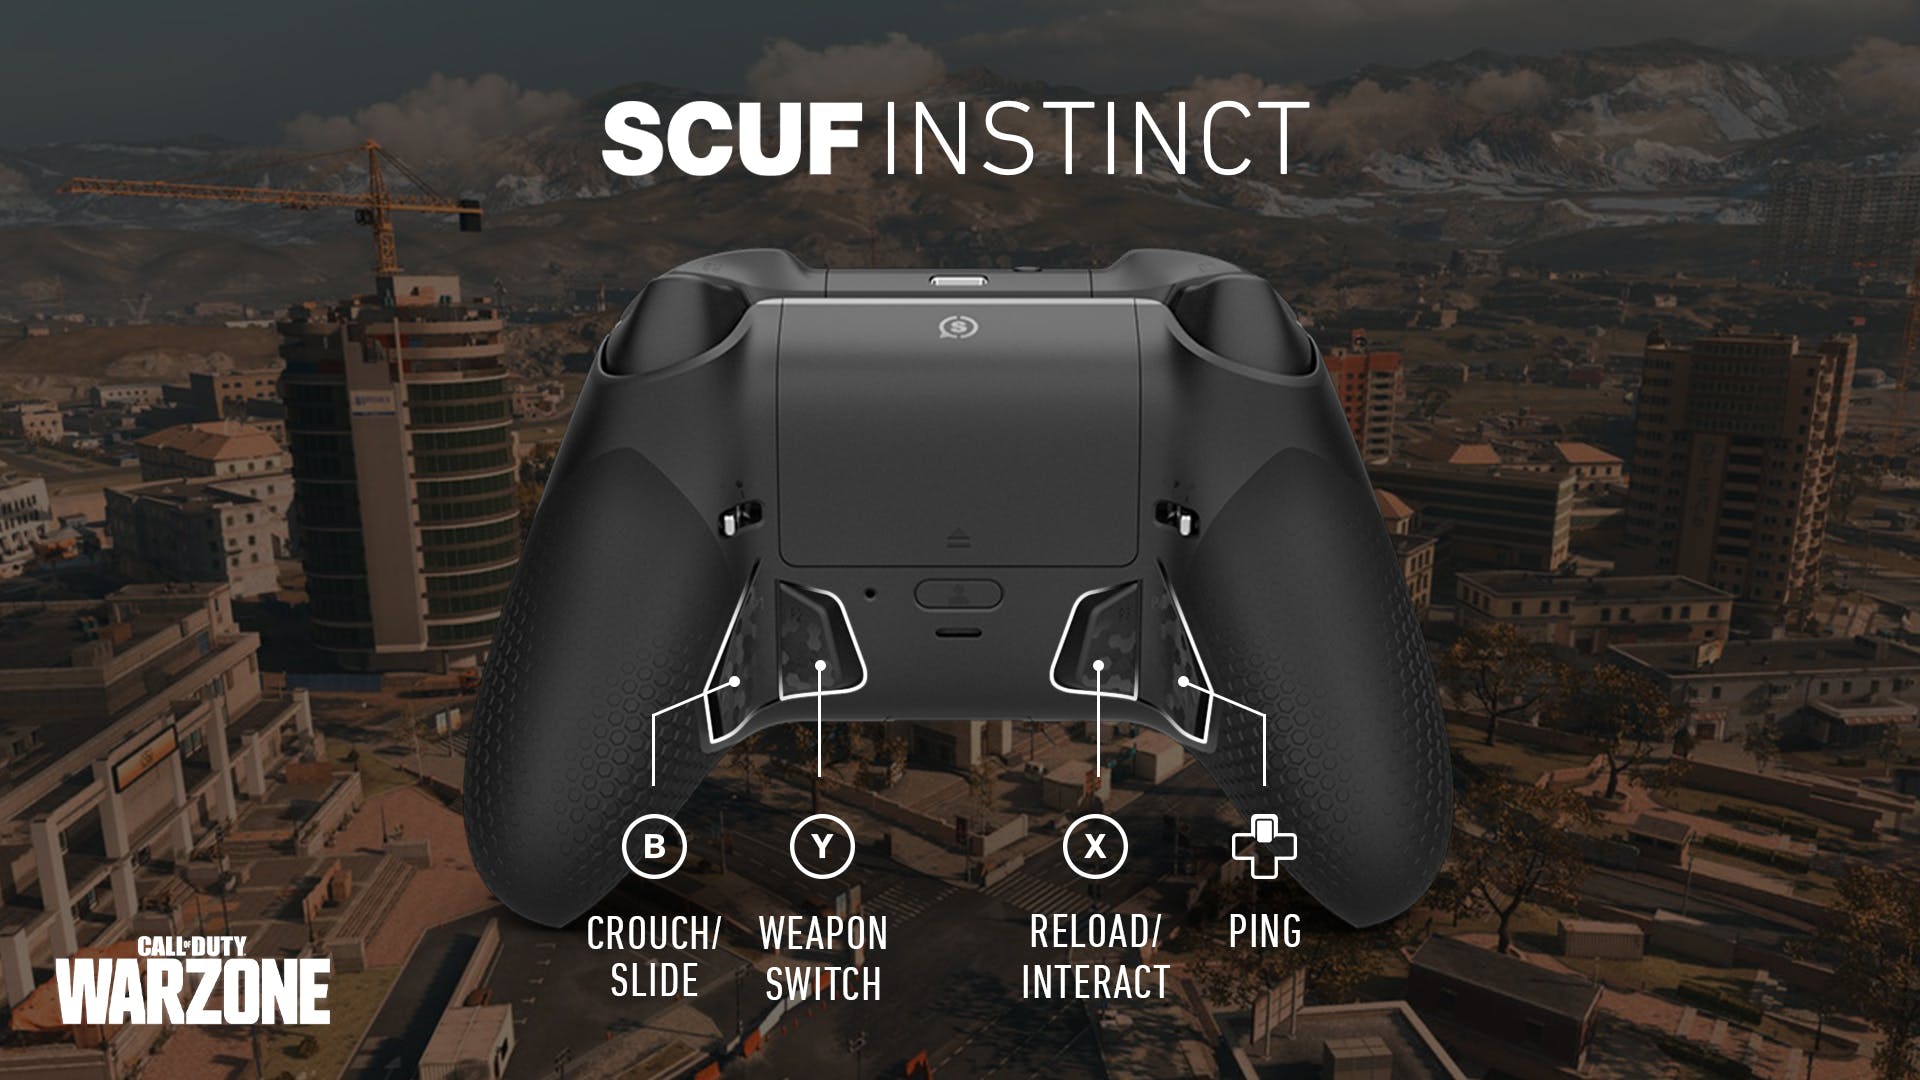 SCUF IMPACT COD Warzone PS4 Controller Setup